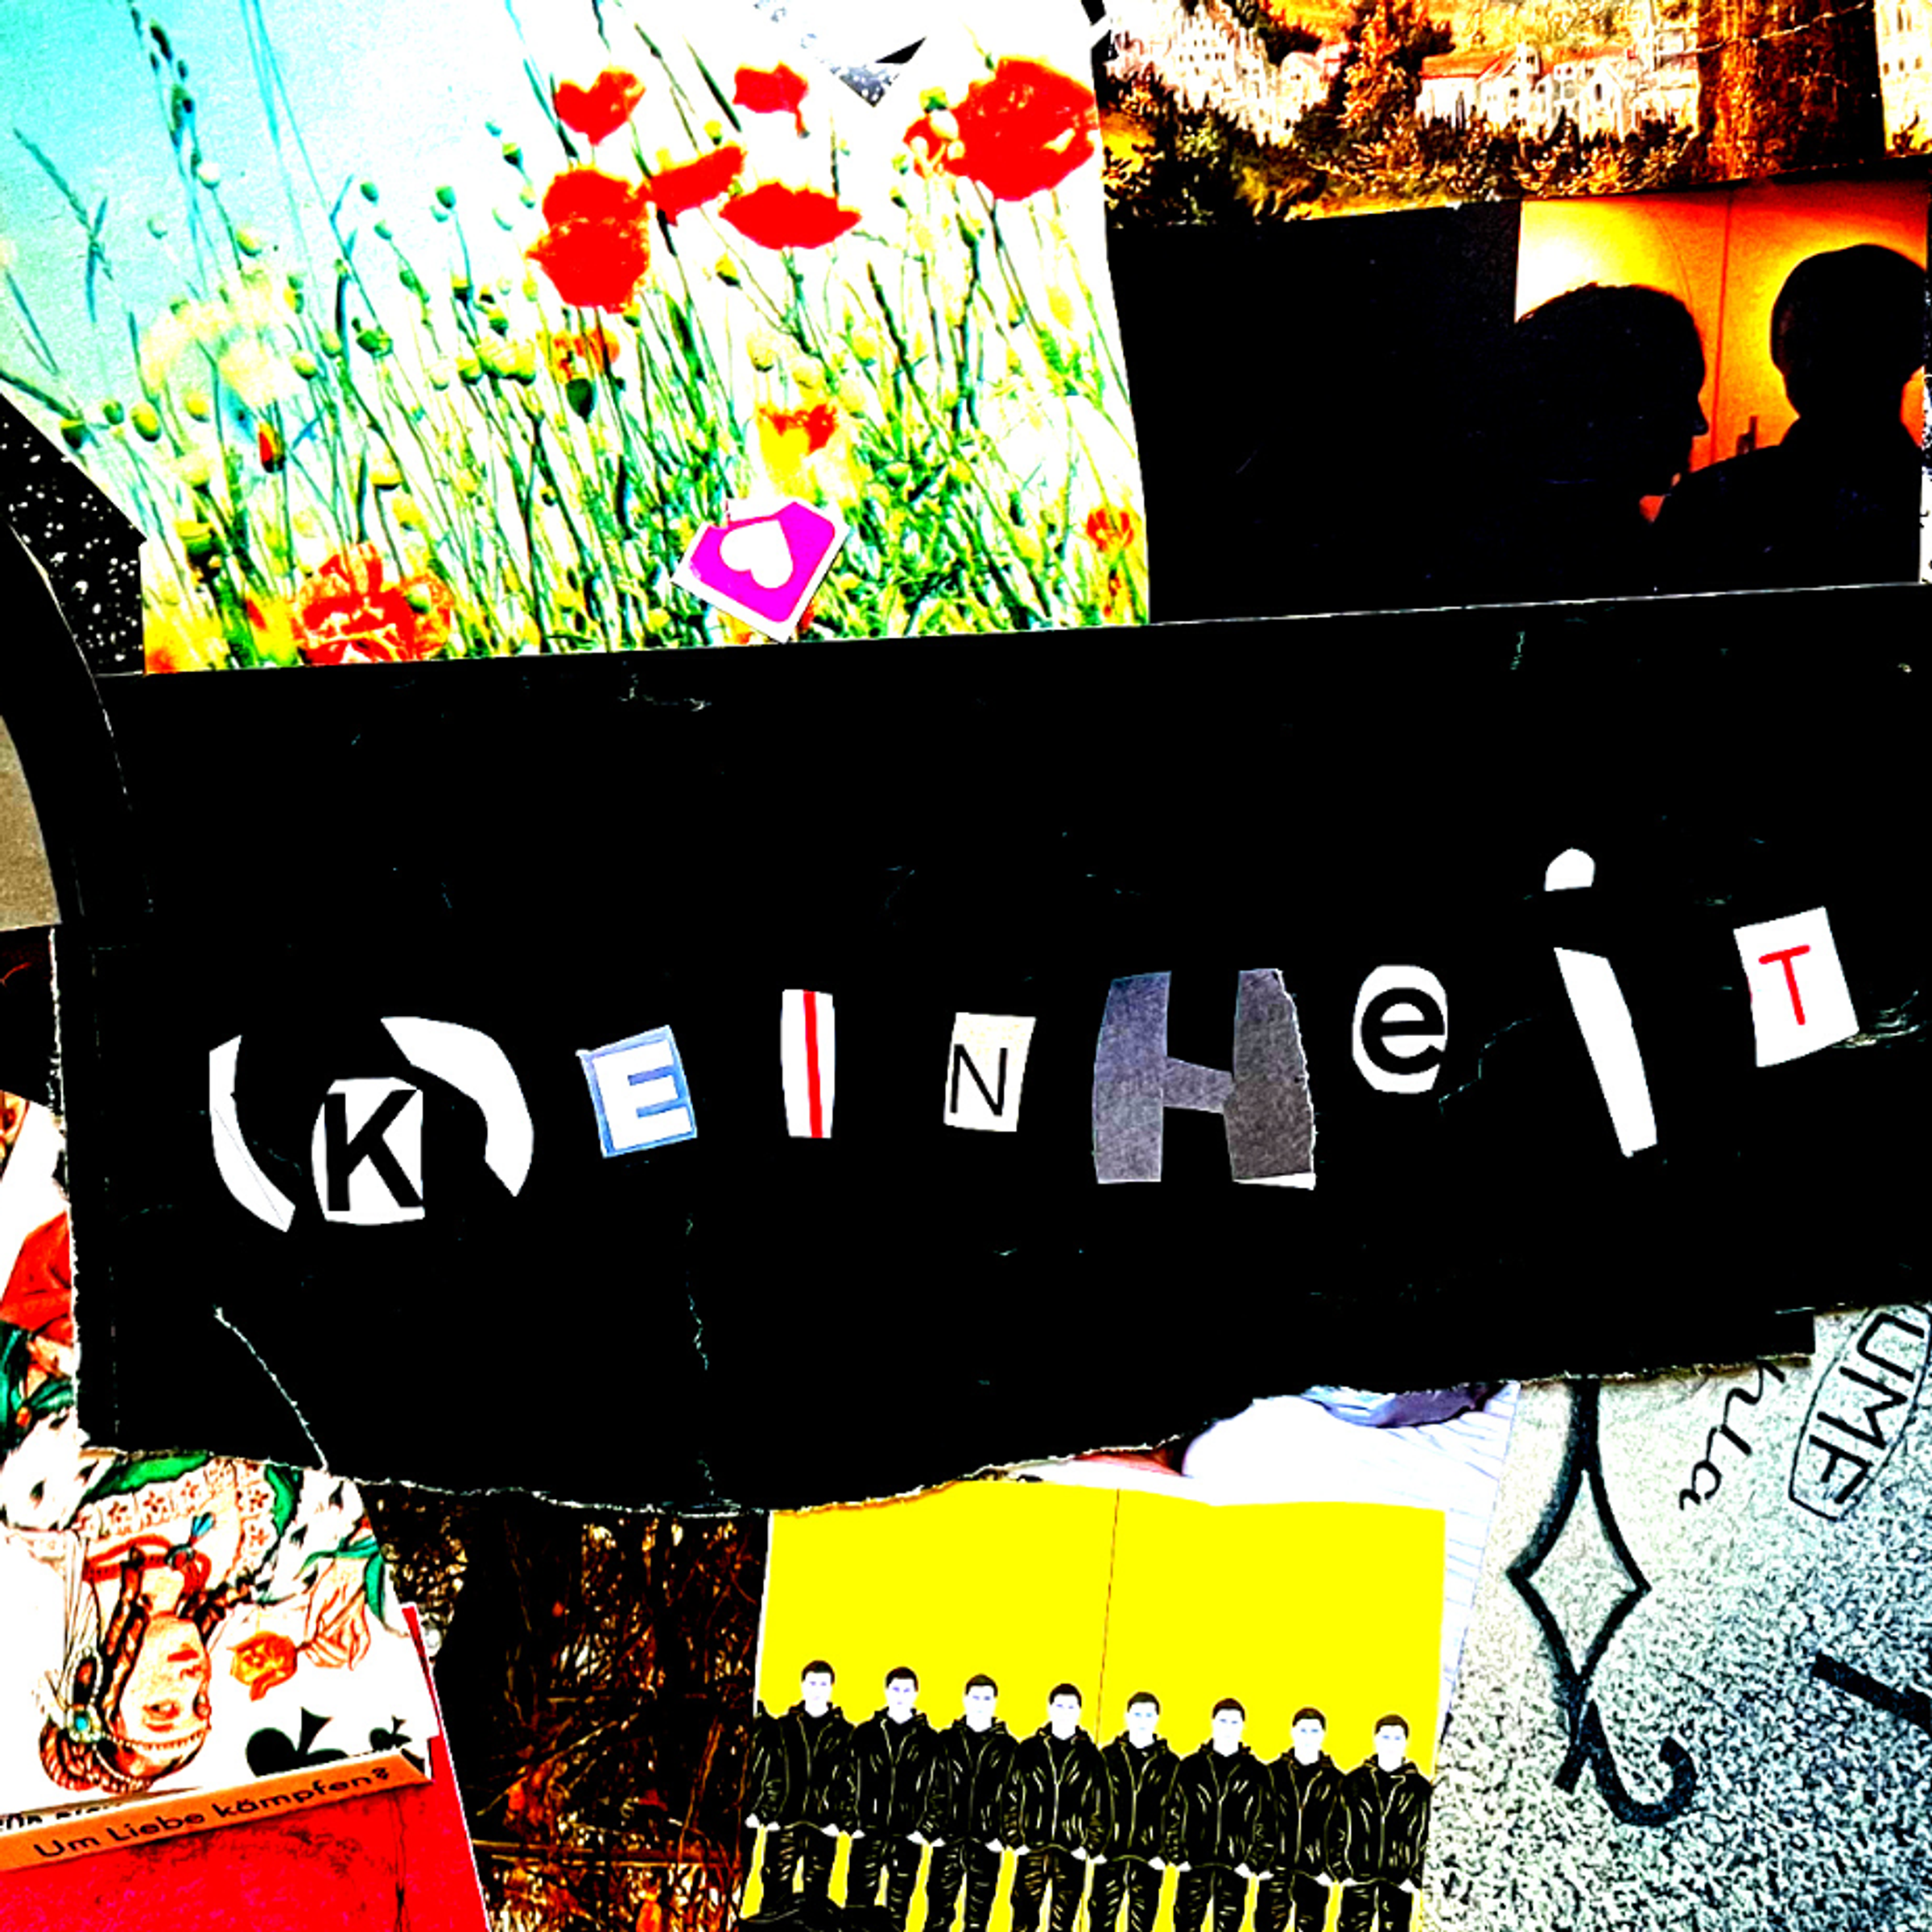 The image shows a graphic with the word (K)Einheit in newspaper letters at the center. Around it is a collage of various images, such as a meadow of flowers. The colors are very vibrant.